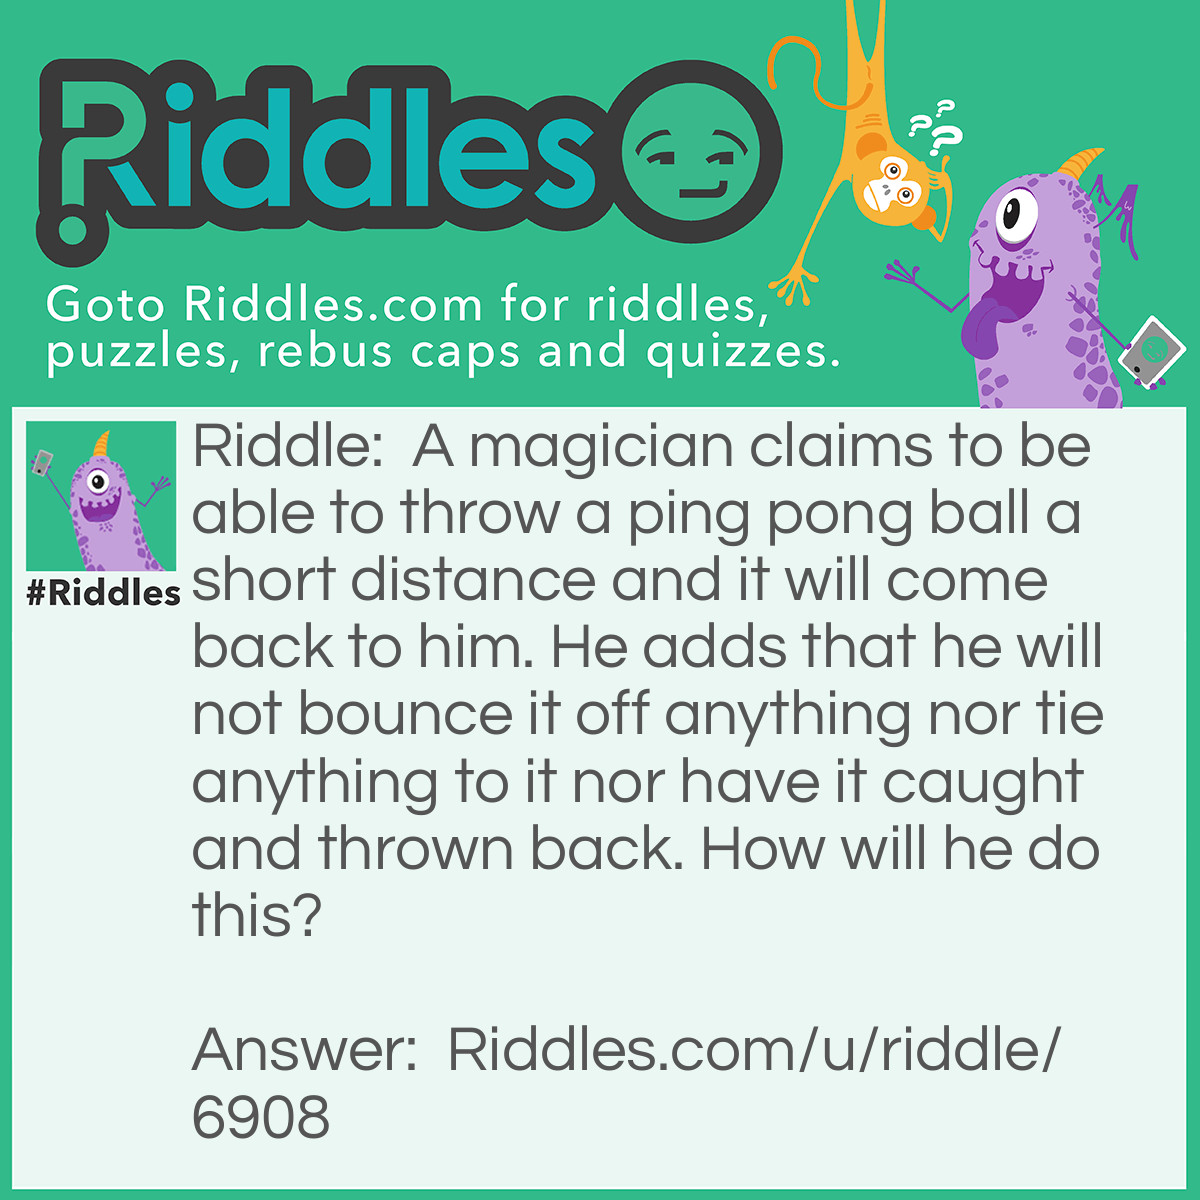 Riddle: A magician claims to be able to throw a ping pong ball a short distance and it will come back to him. He adds that he will not bounce it off anything nor tie anything to it nor have it caught and thrown back. How will he do this? Answer: He throws the ball upwards.